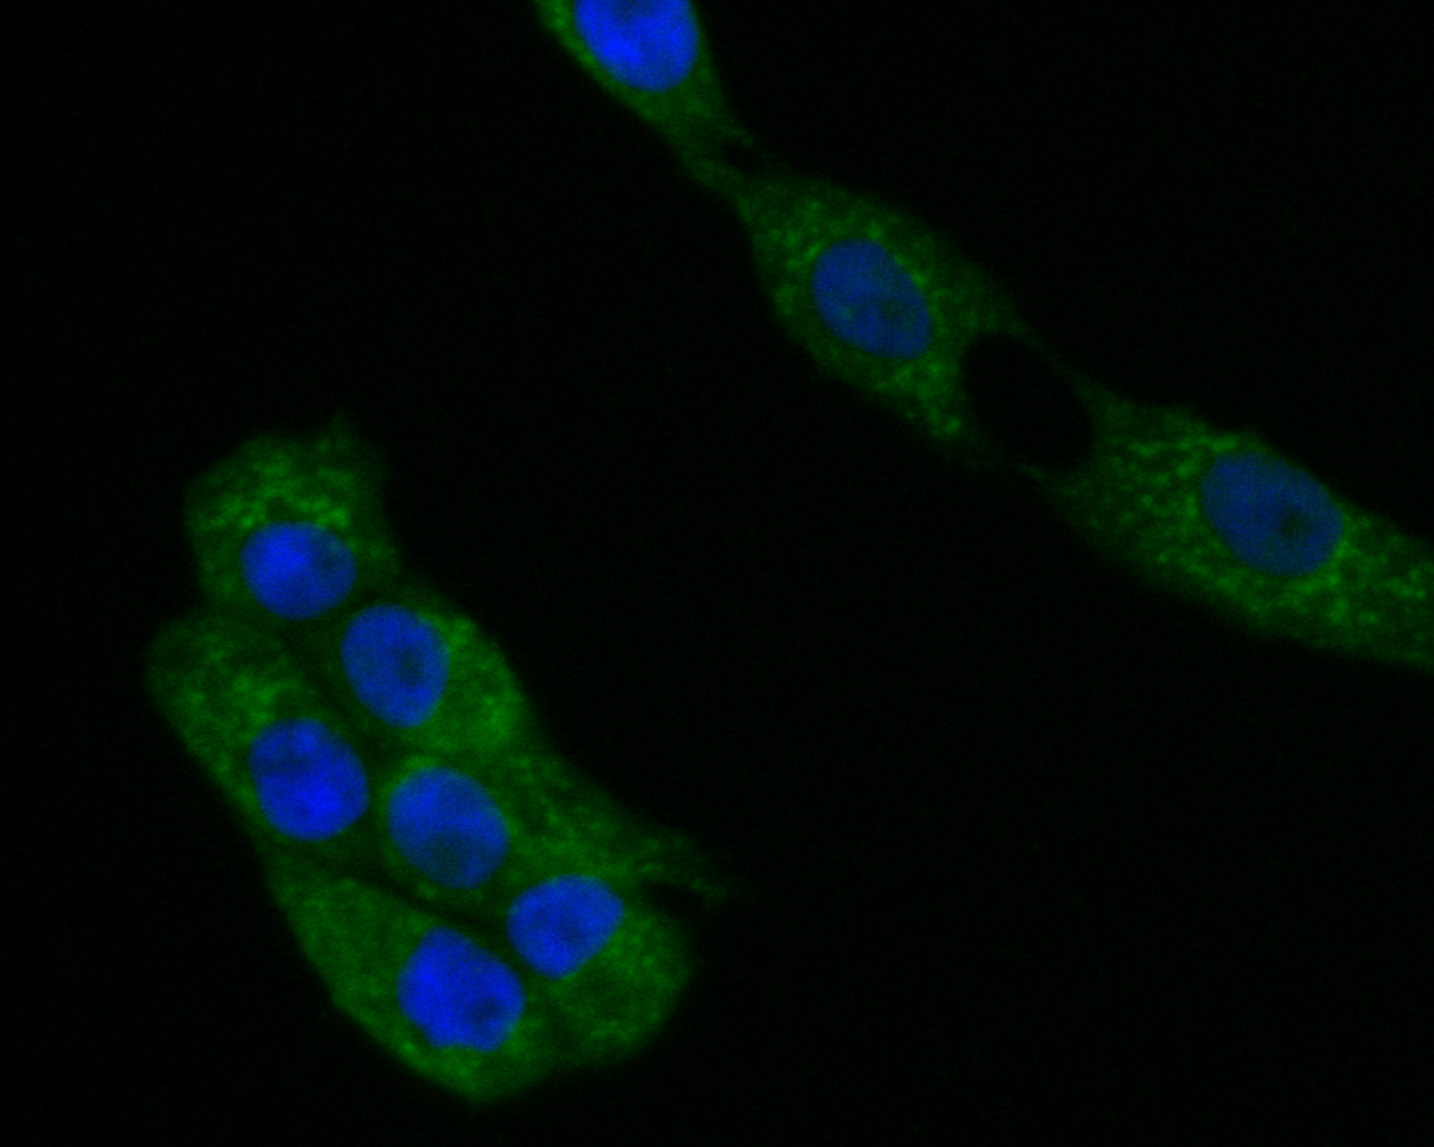 ICC staining of ACADL in MG-63 cells (green). Formalin fixed cells were permeabilized with 0.1% Triton X-100 in TBS for 10 minutes at room temperature and blocked with 1% Blocker BSA for 15 minutes at room temperature. Cells were probed with the primary antibody (ER1901-11, 1/50) for 1 hour at room temperature, washed with PBS. Alexa Fluor®488 Goat anti-Rabbit IgG was used as the secondary antibody at 1/1,000 dilution. The nuclear counter stain is DAPI (blue).